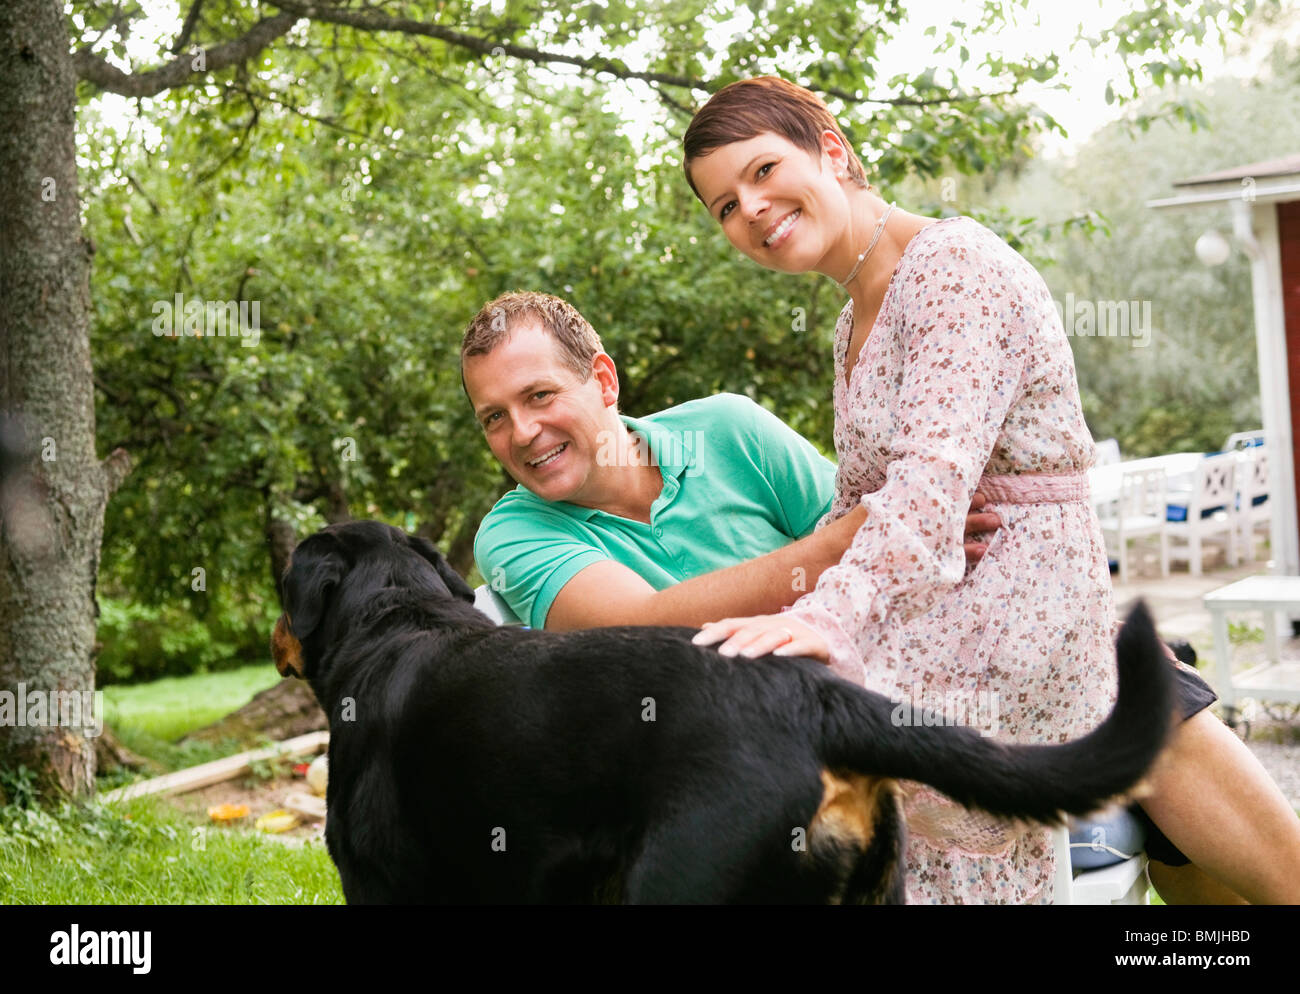 Woman and man with dog Stock Photo